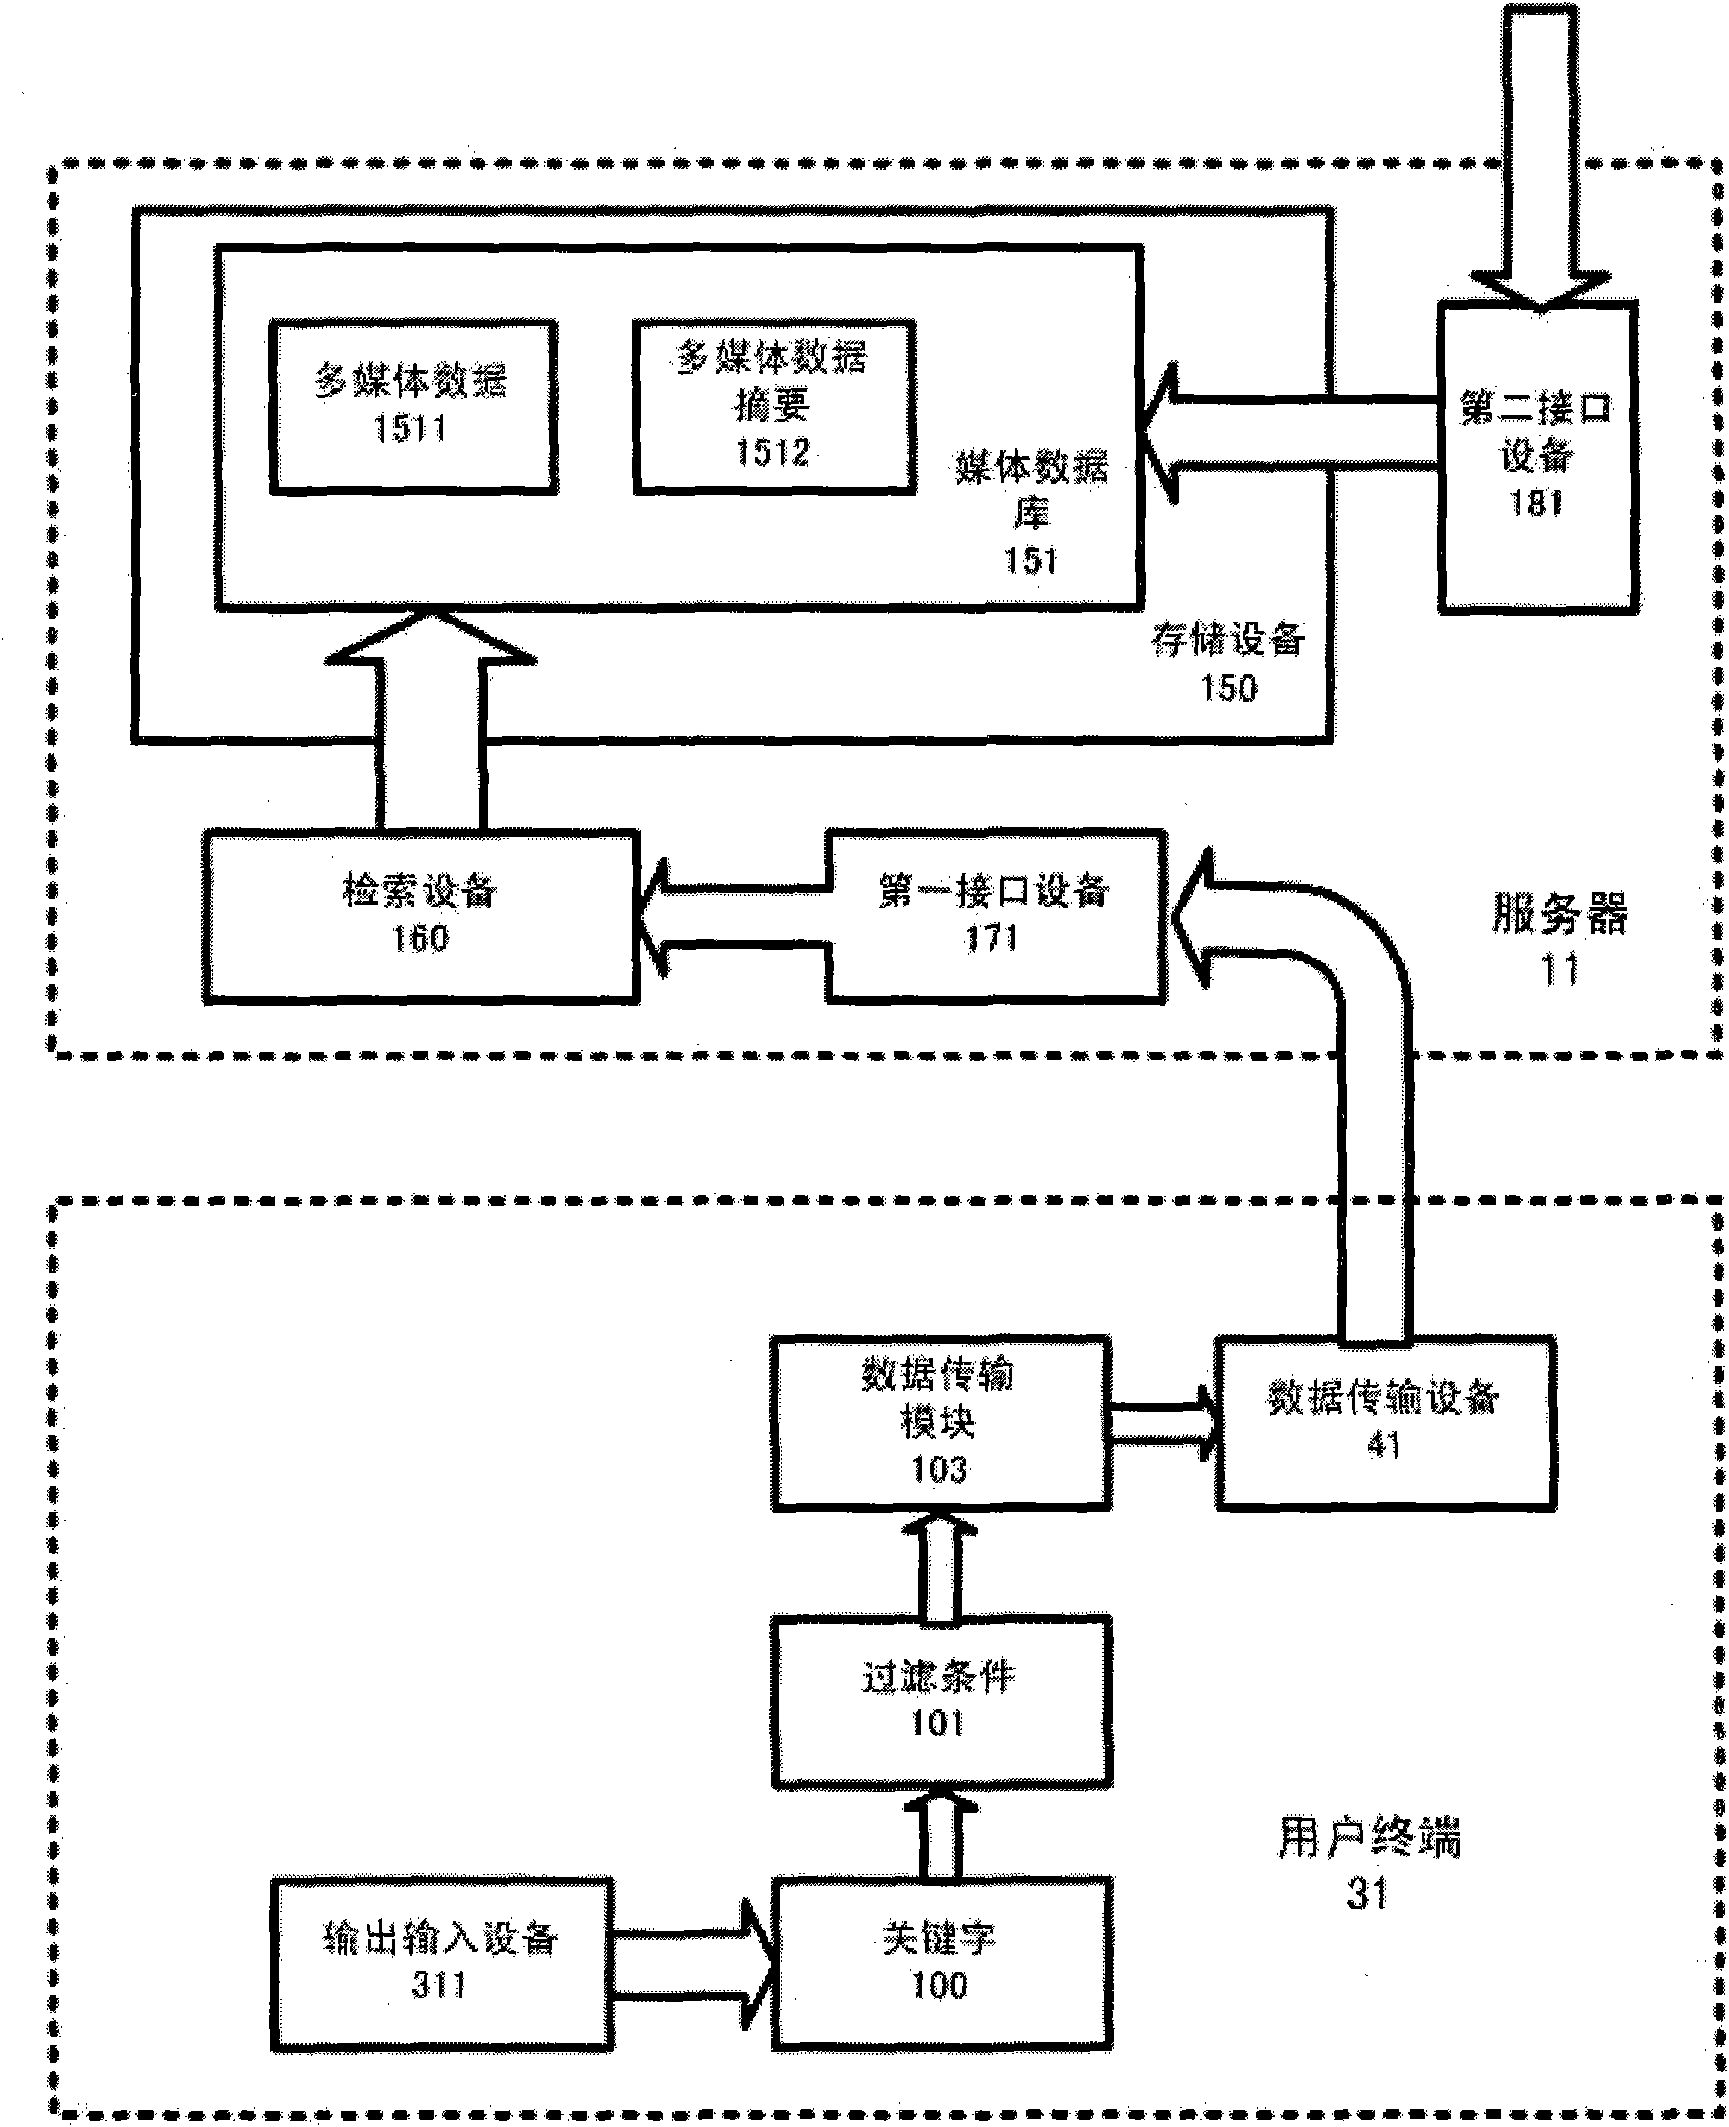 Method and system for providing multimedia data searching and querying service